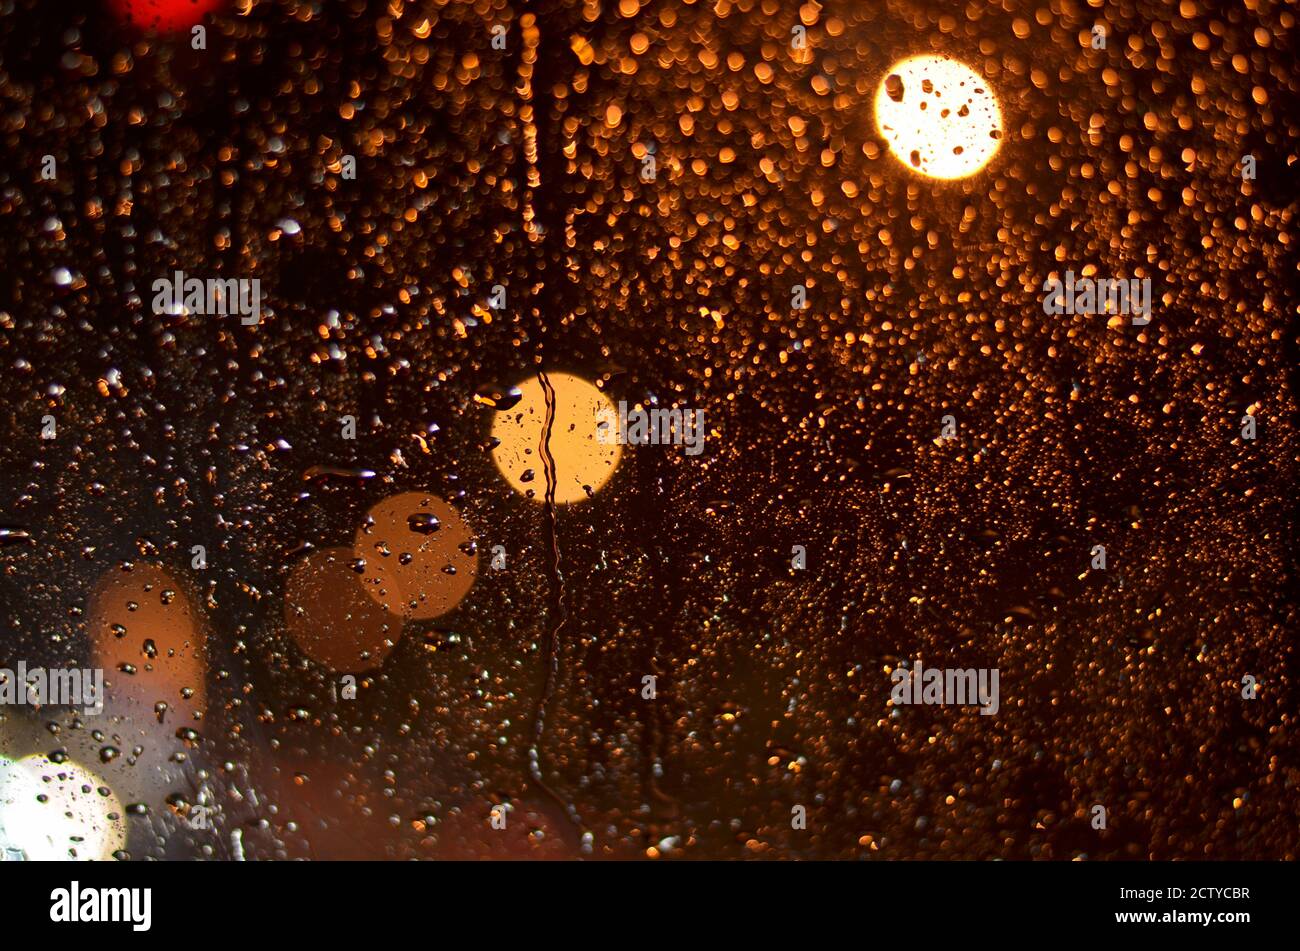 Raindrops on the glass of the car lit by street lamps in the night. Stock Photo